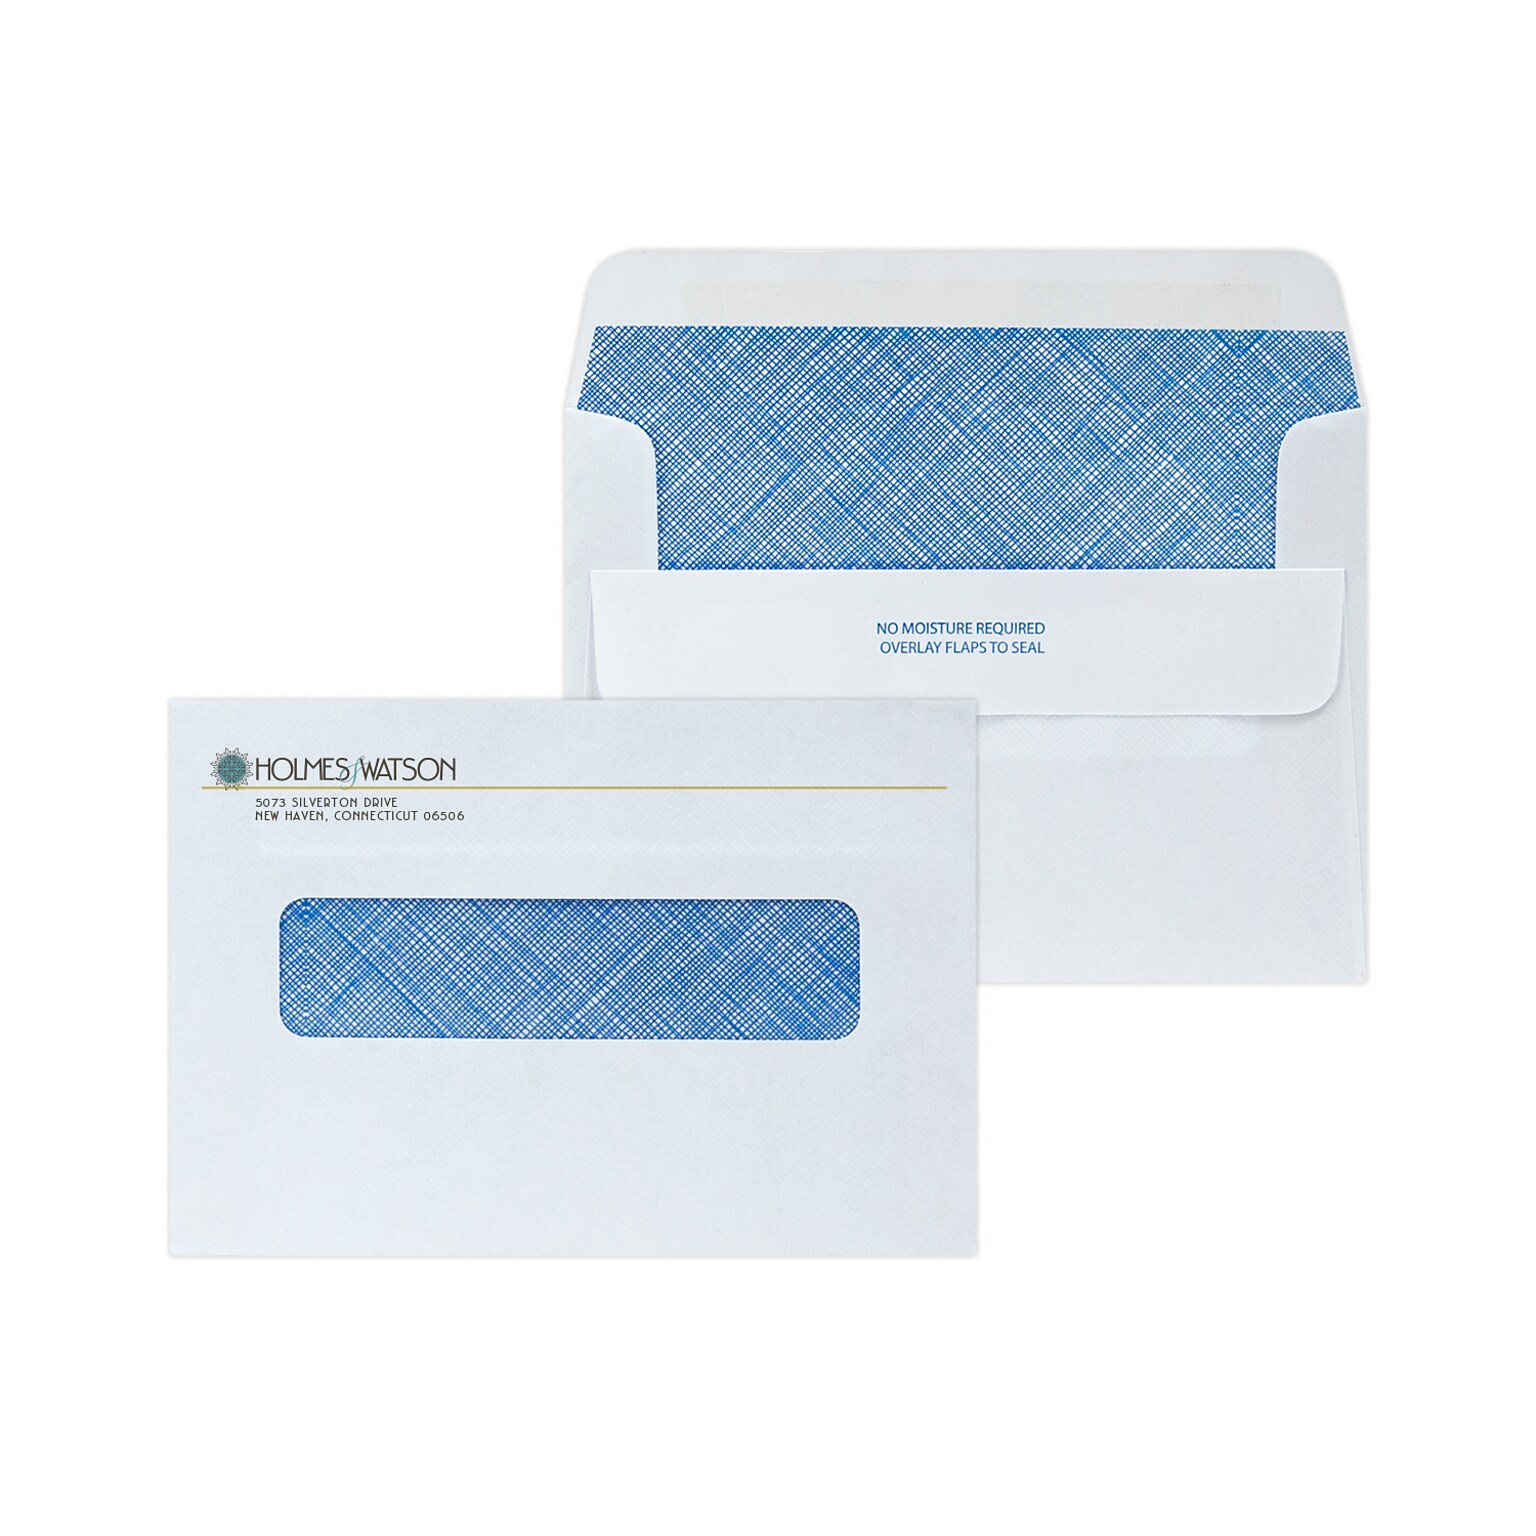 Custom Full Color 4-1/2 x 6-1/2 One Fold Self Seal Billing Window Envelopes with Security Tint, 24# White Wove, 250 / Pack